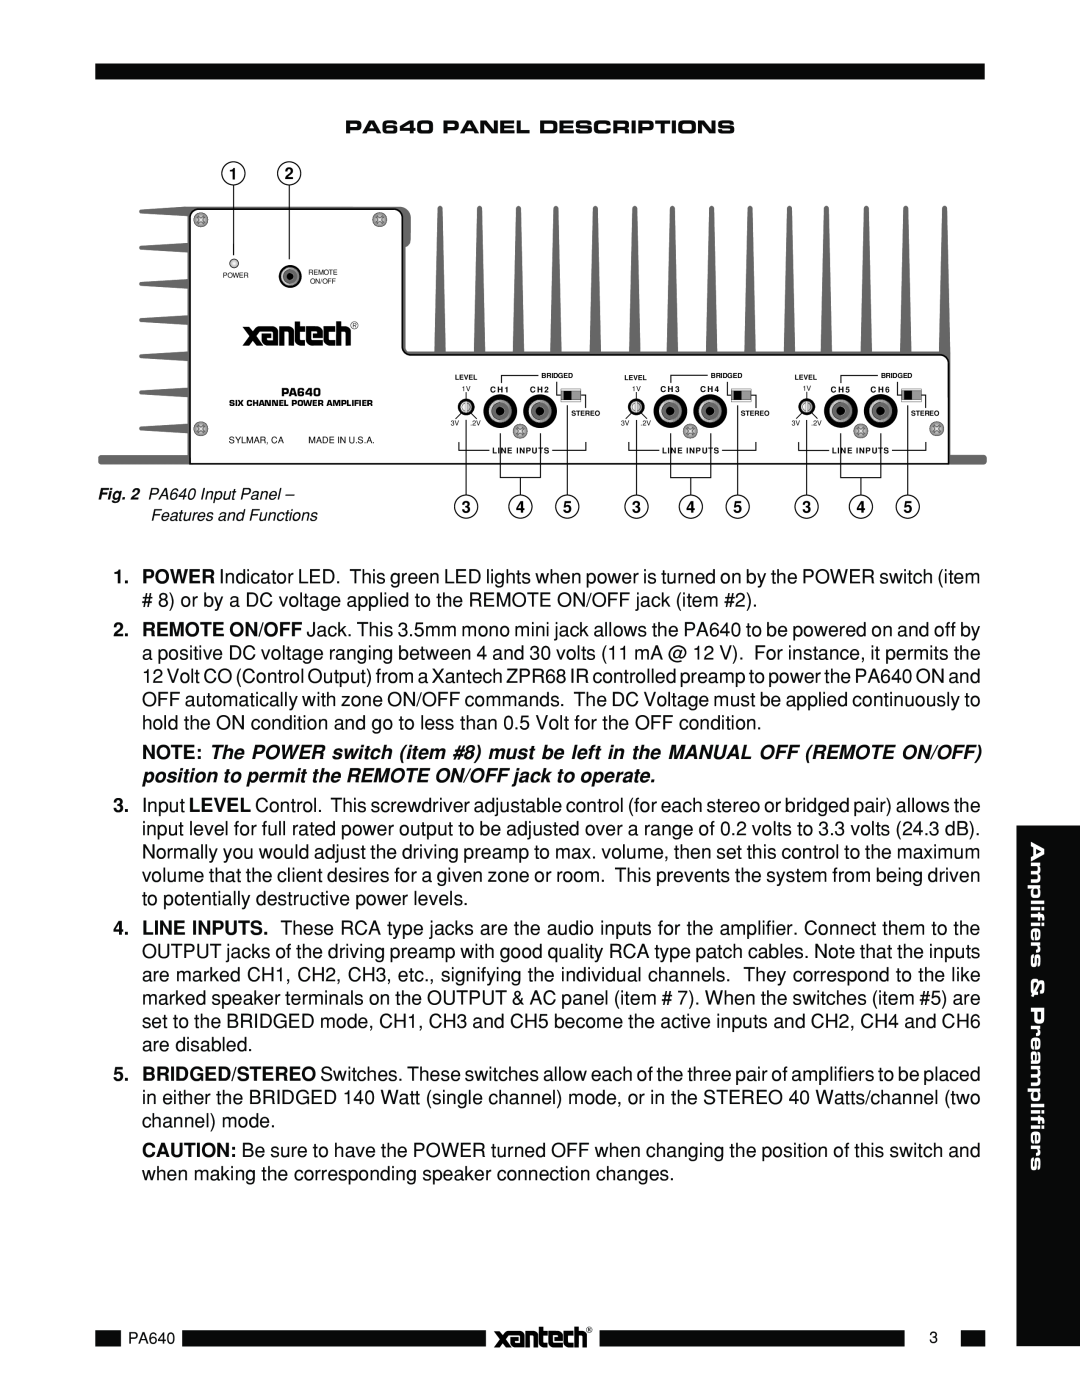 Xantech PA640 installation instructions # 8 or by a DC voltage applied to the REMOTE ON/OFF jack item #2 